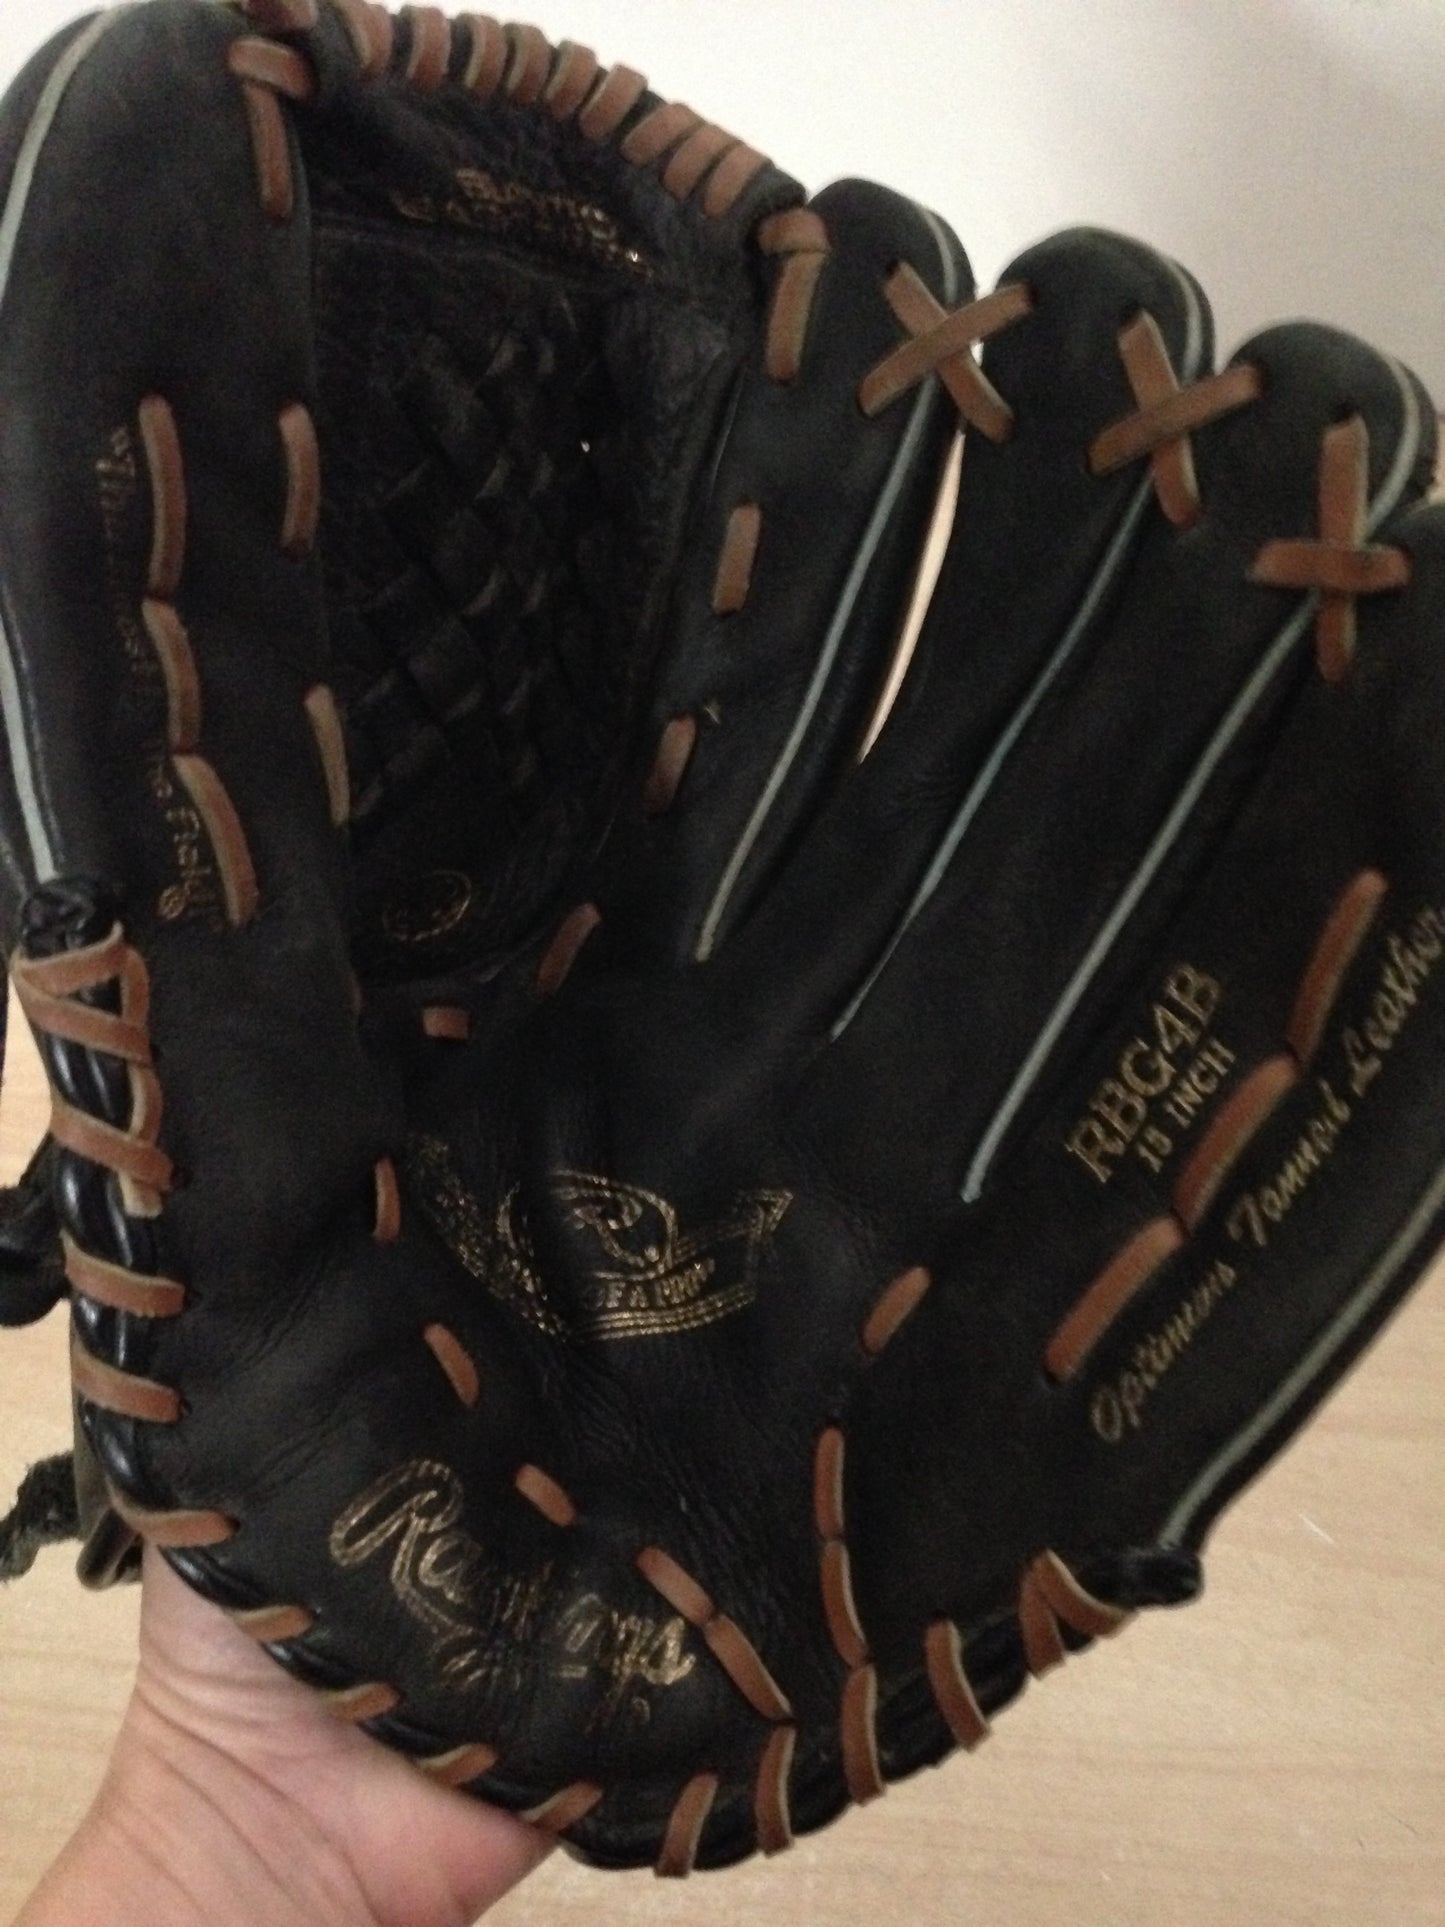 Baseball Glove Adult Size 13 inch Rawlings Black Brown Soft Leather Fits on Left Hand